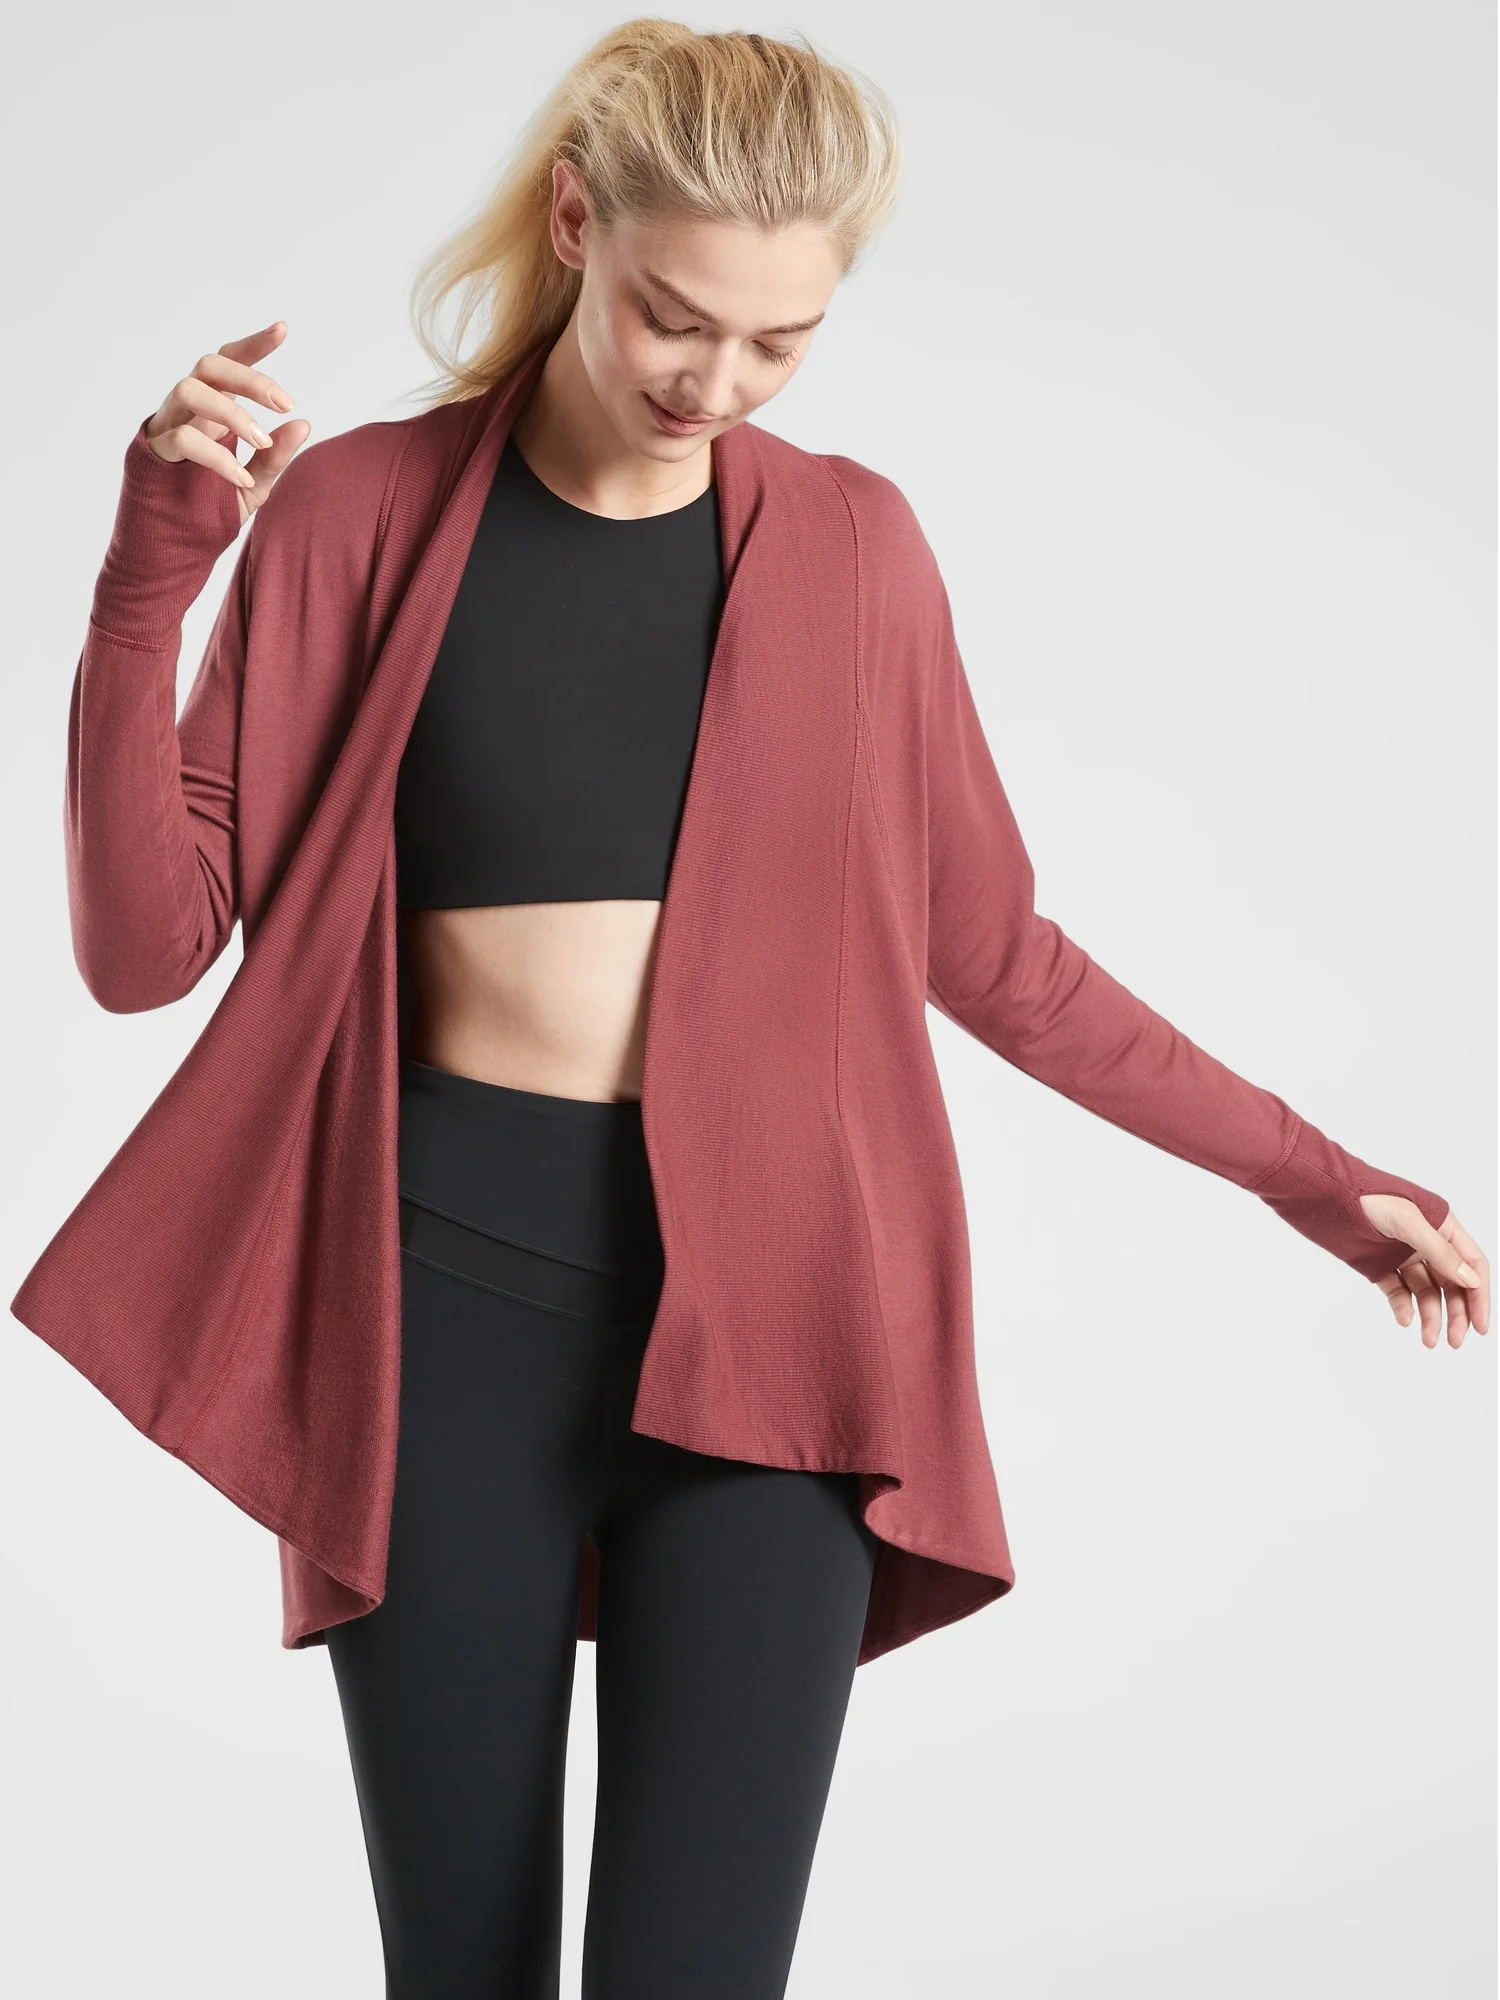 ✨ I love a good dupe! 🖤 🤩 The Athleta Pranayama Wrap is $89 & the dupe is  $28 with great reviews? So save or splurgewhich one?